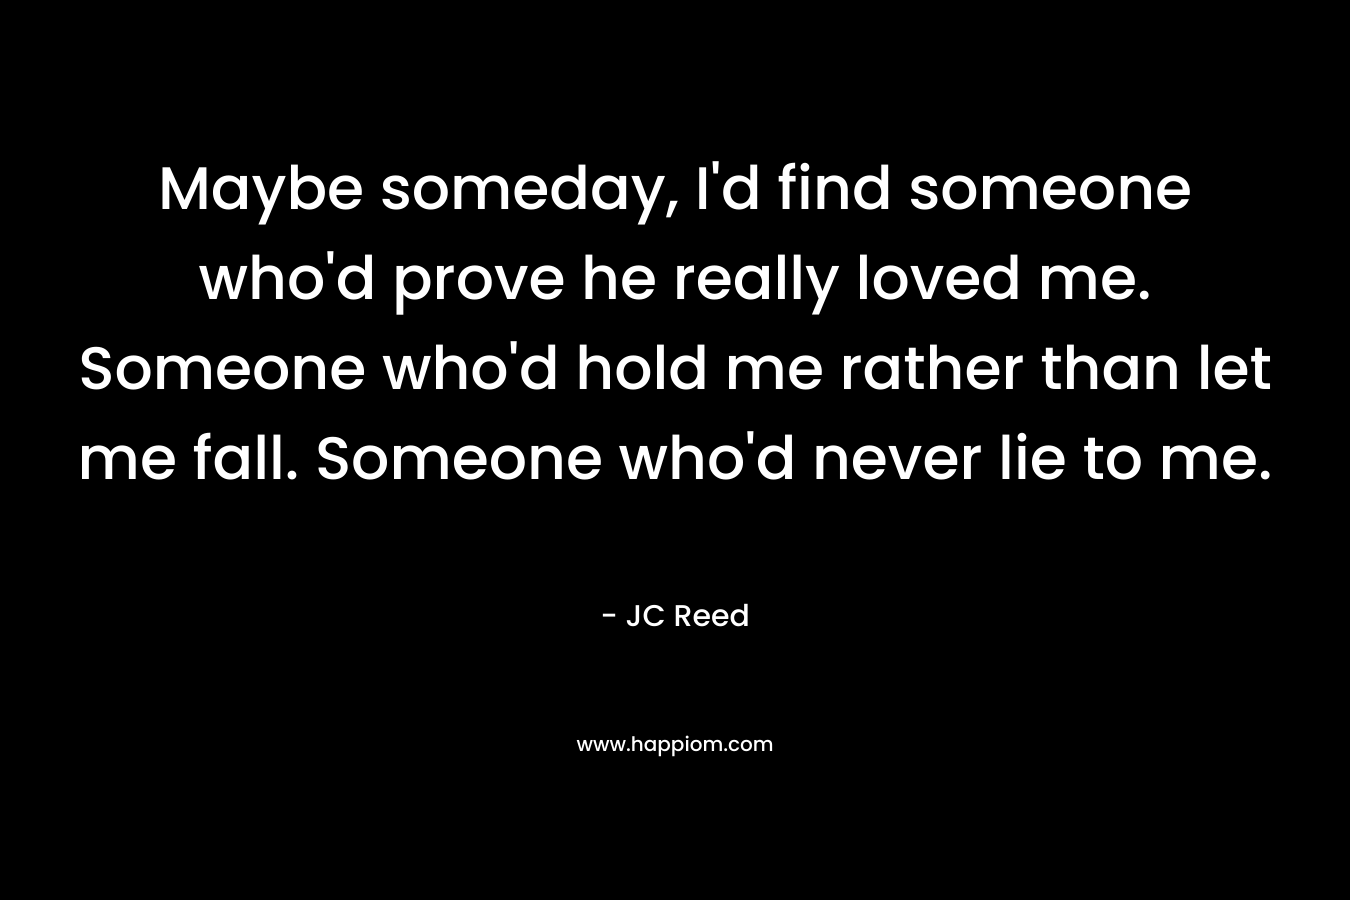 Maybe someday, I’d find someone who’d prove he really loved me. Someone who’d hold me rather than let me fall. Someone who’d never lie to me. – JC Reed